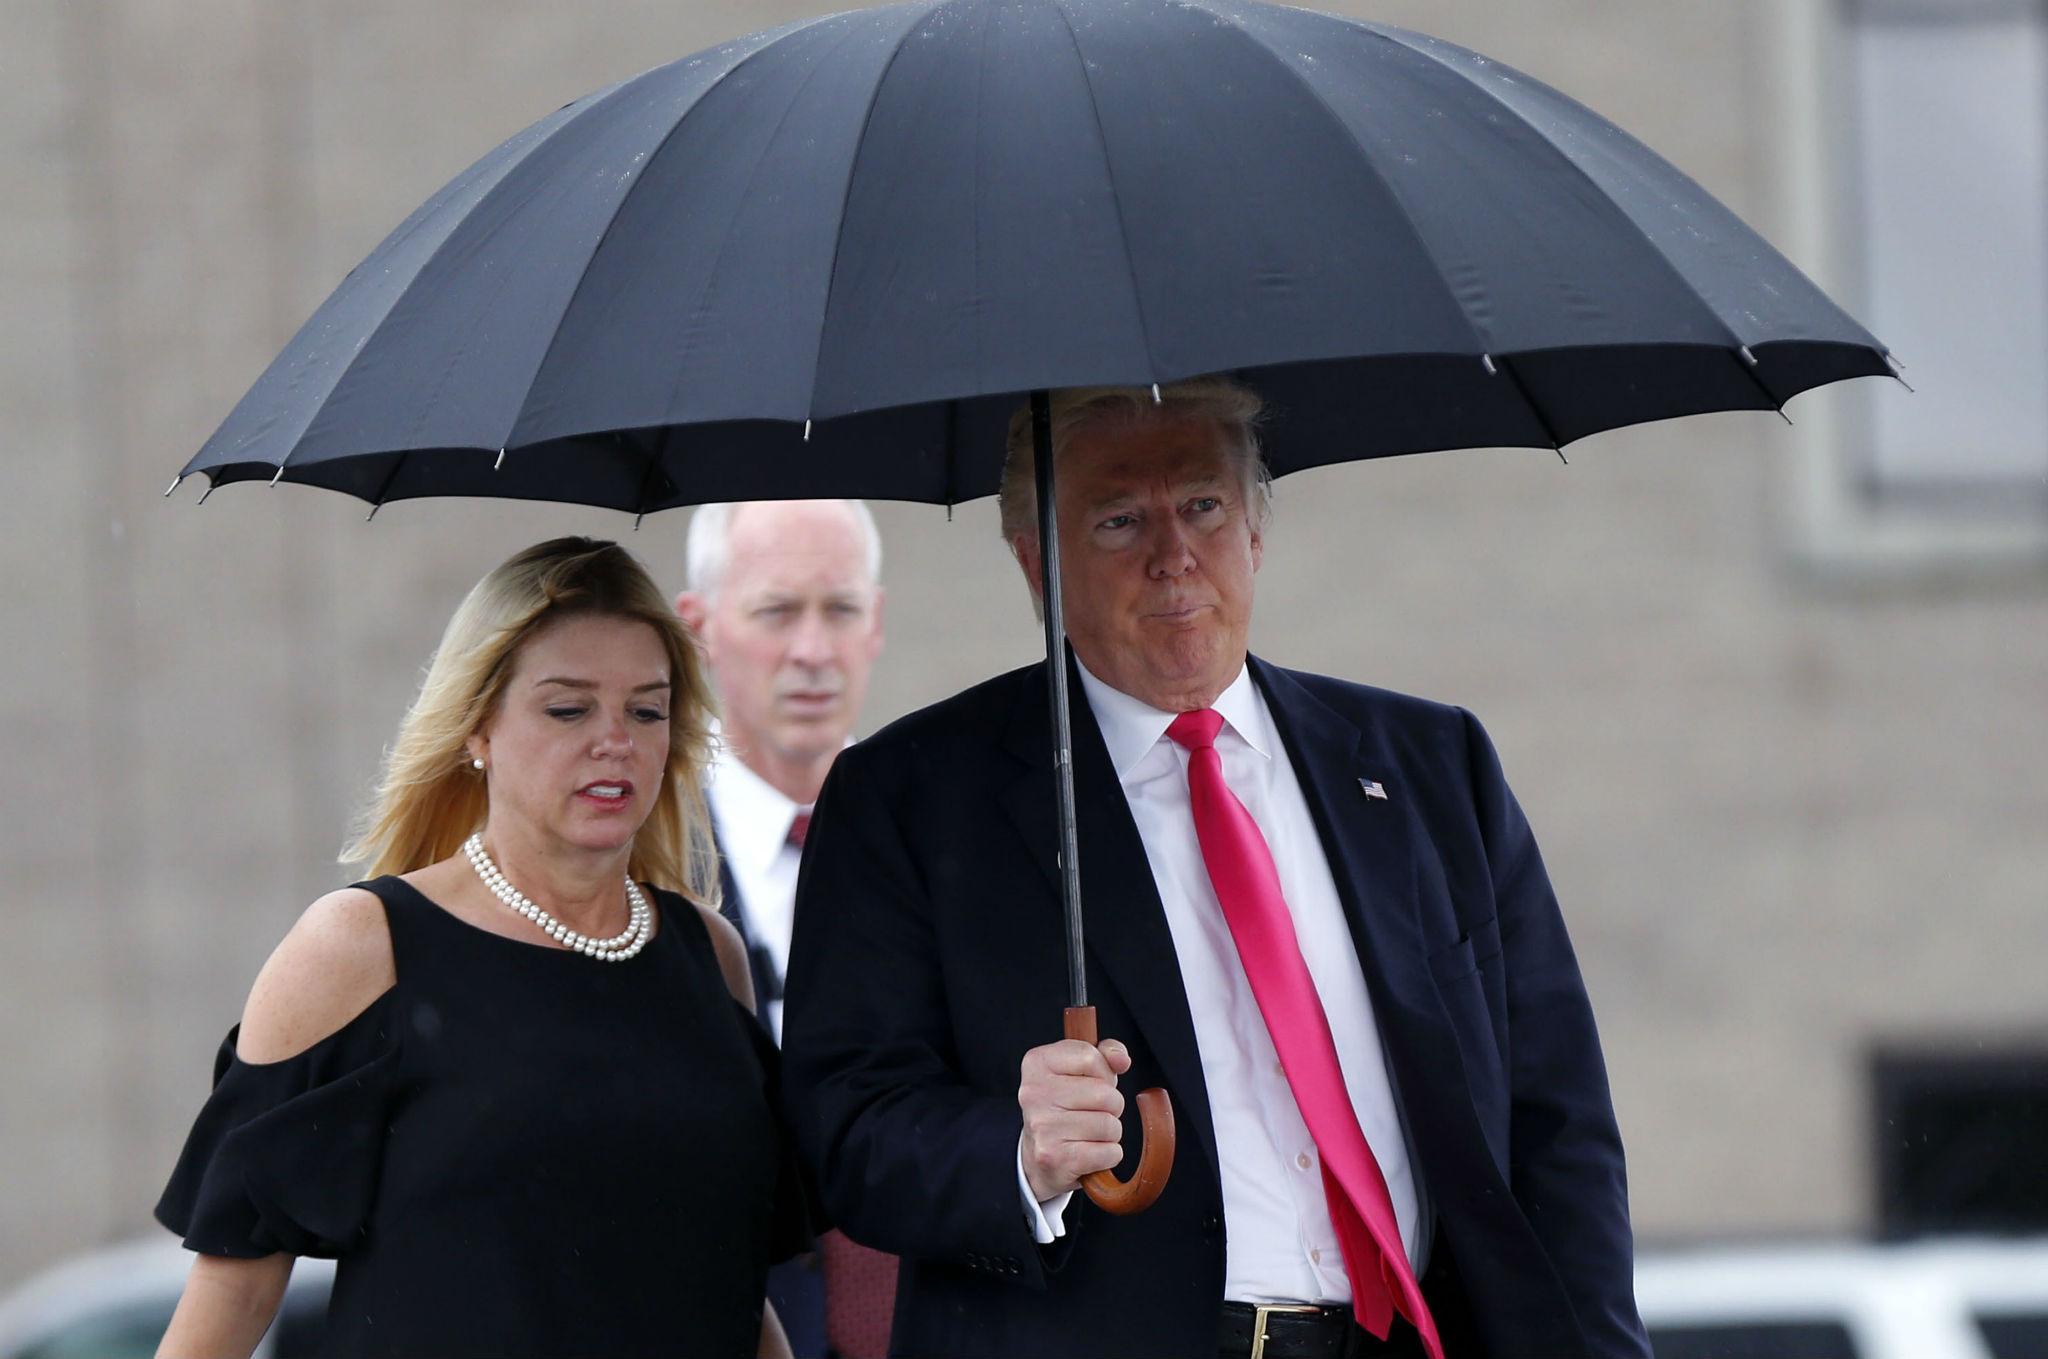 Florida Attorney General Pam Bondi with Donald Trump. She has vowed to send one of the packets to the White House after the case is over